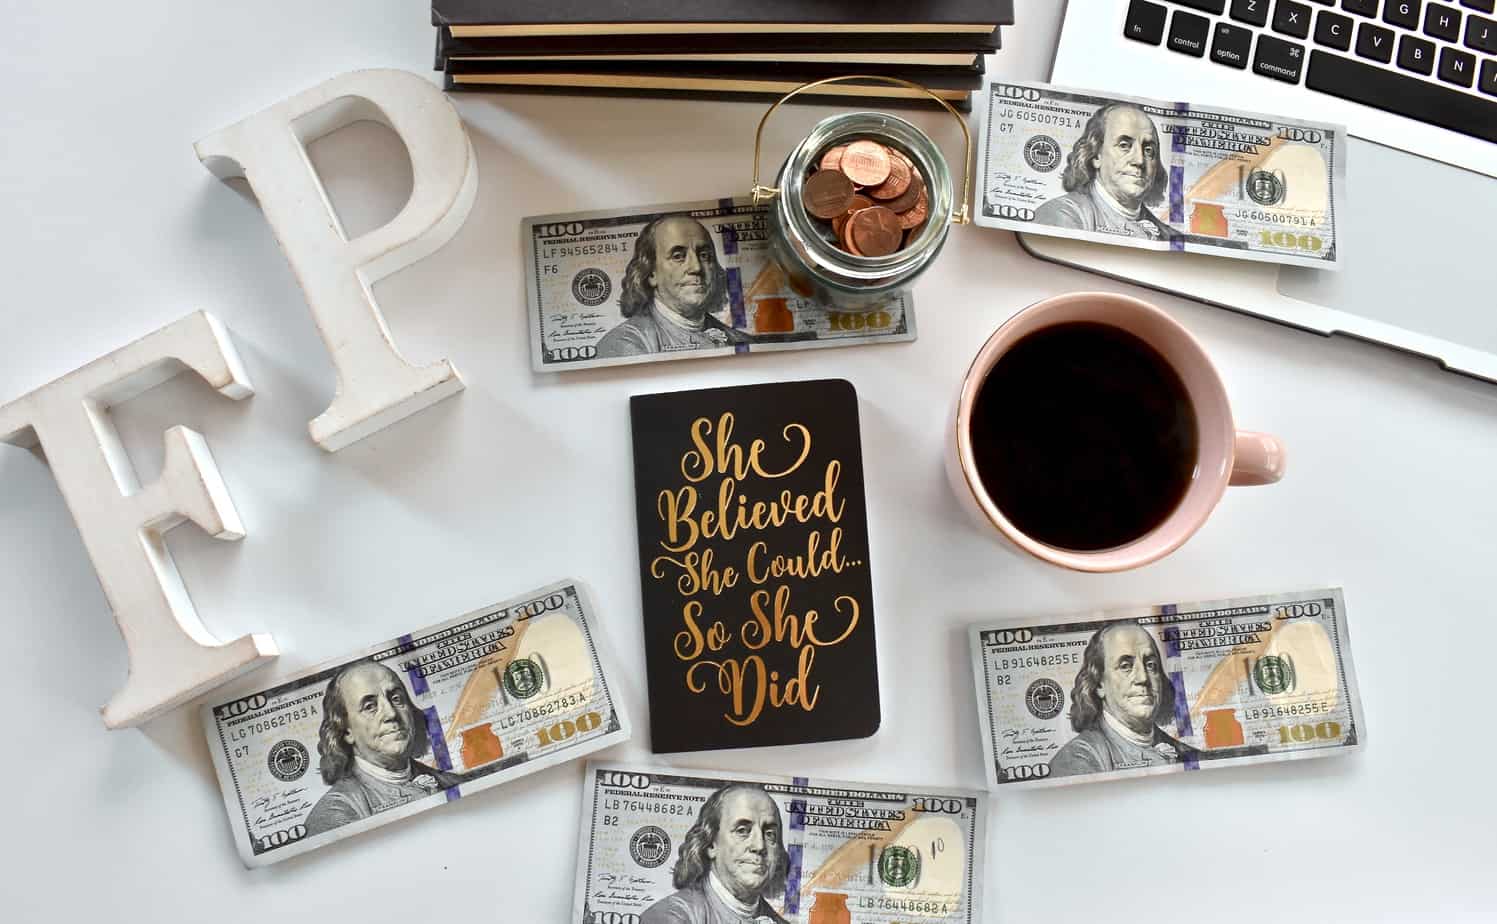 She believed she could, coffee and money.